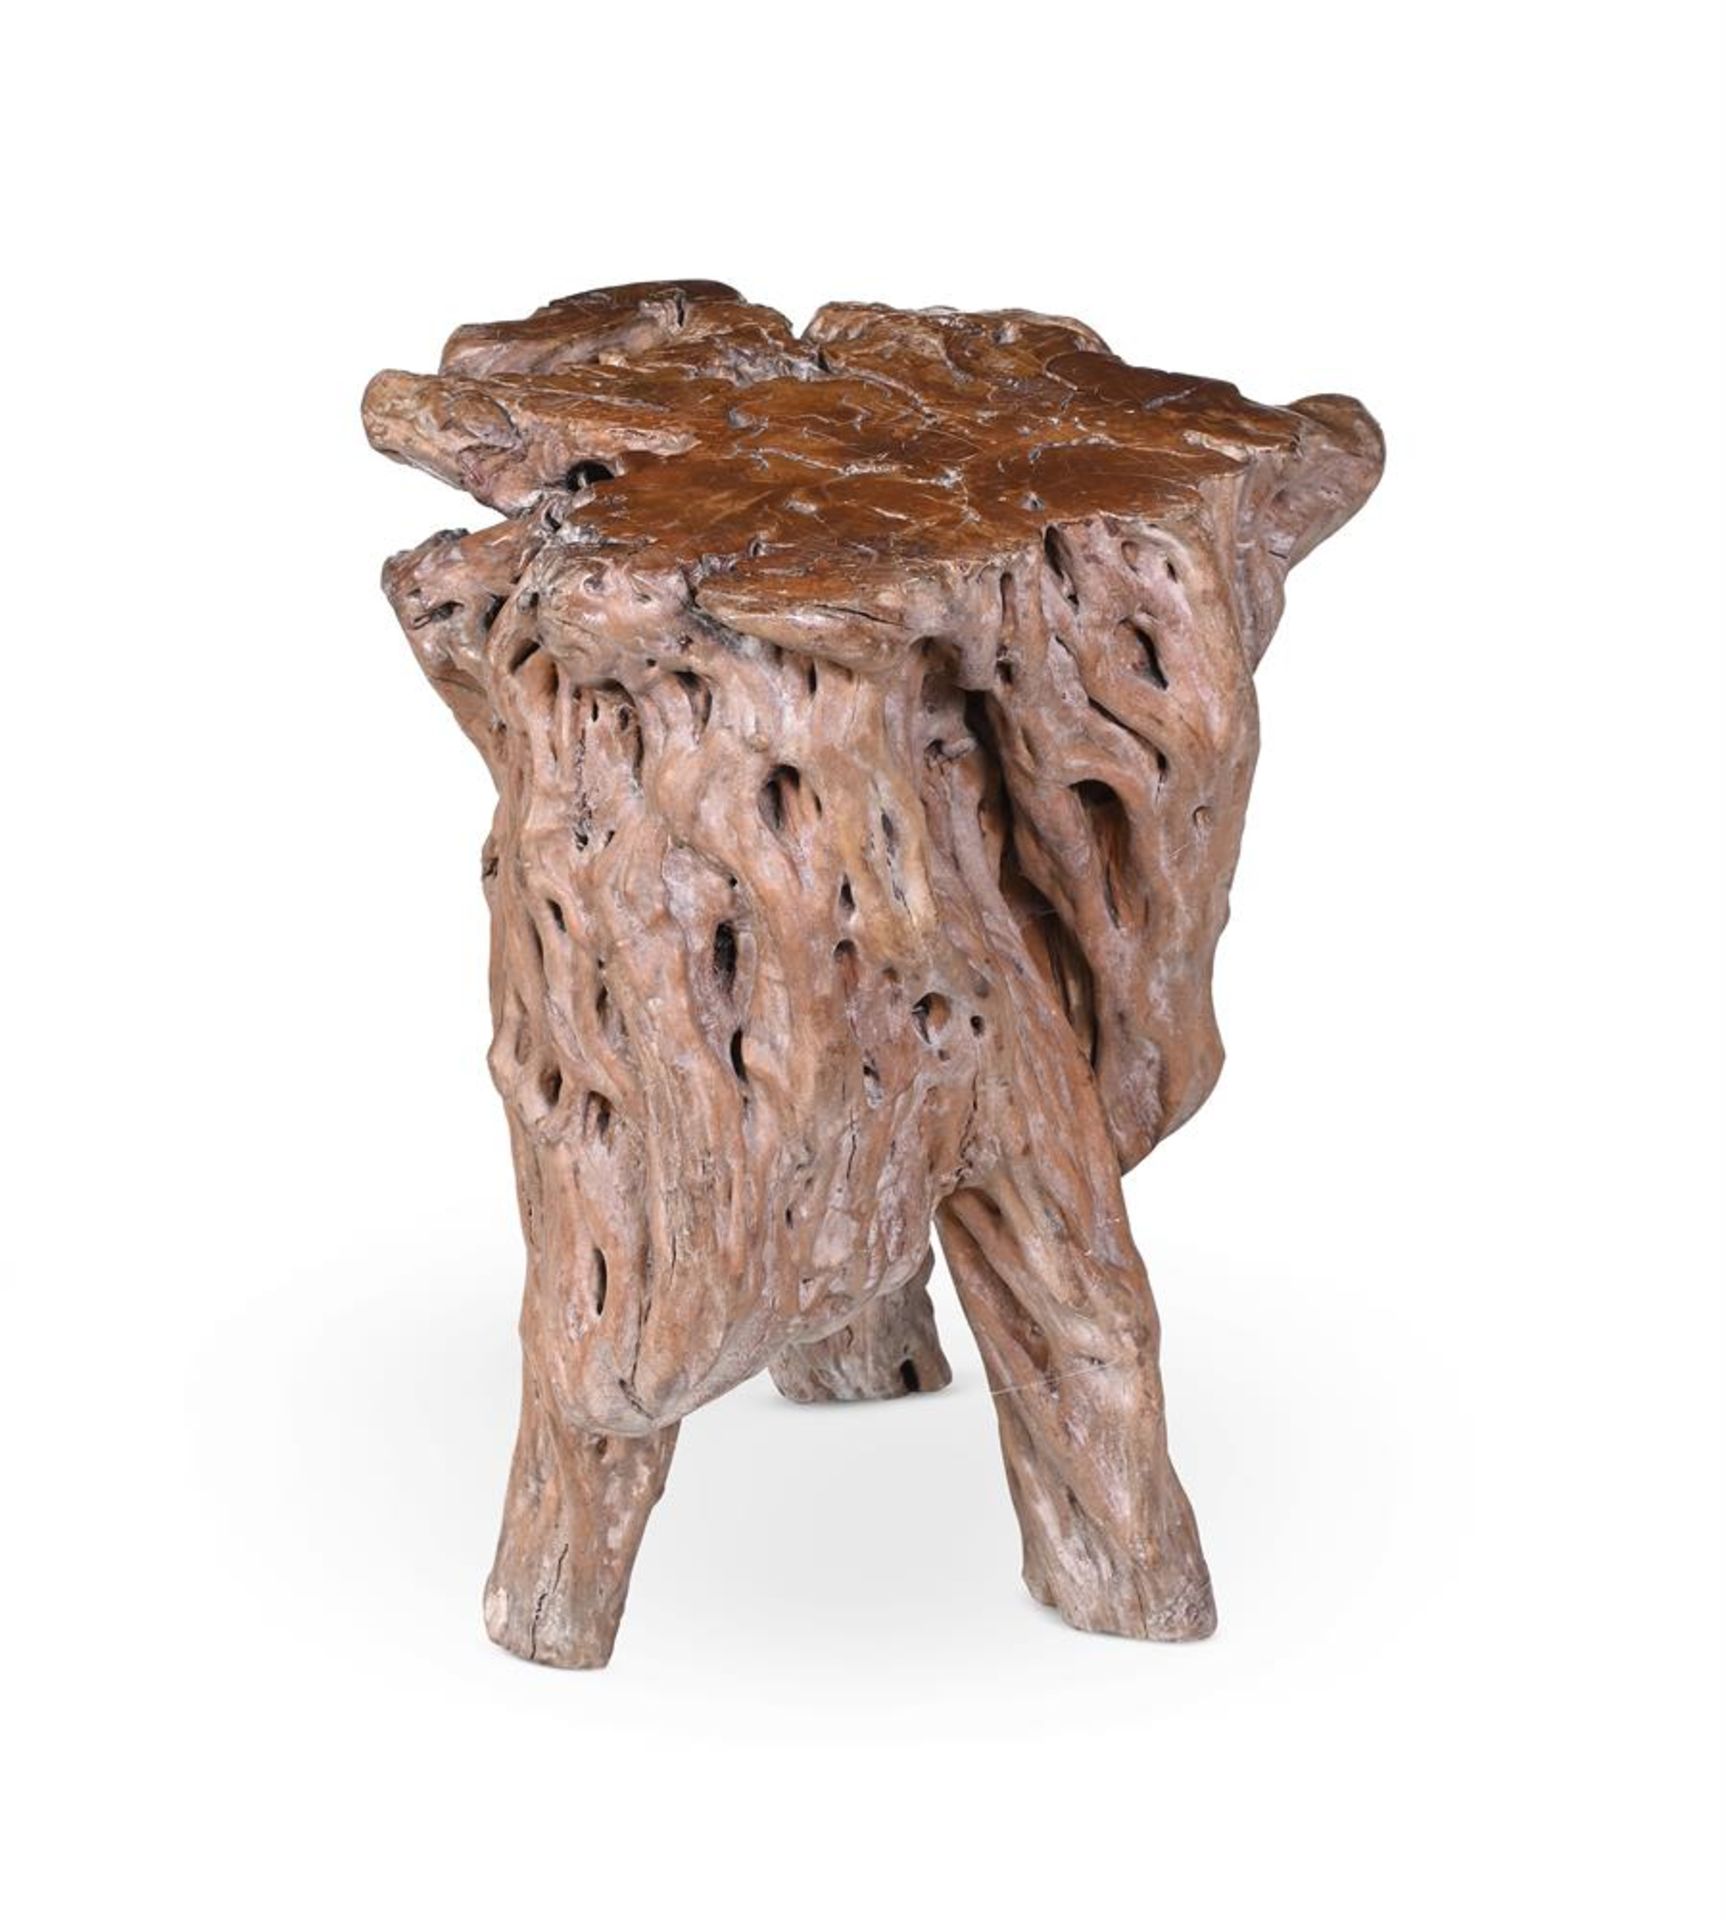 A RUSTIC TABLE FORMED FROM A TREE ROOT, 19TH/ 20TH CENTURY